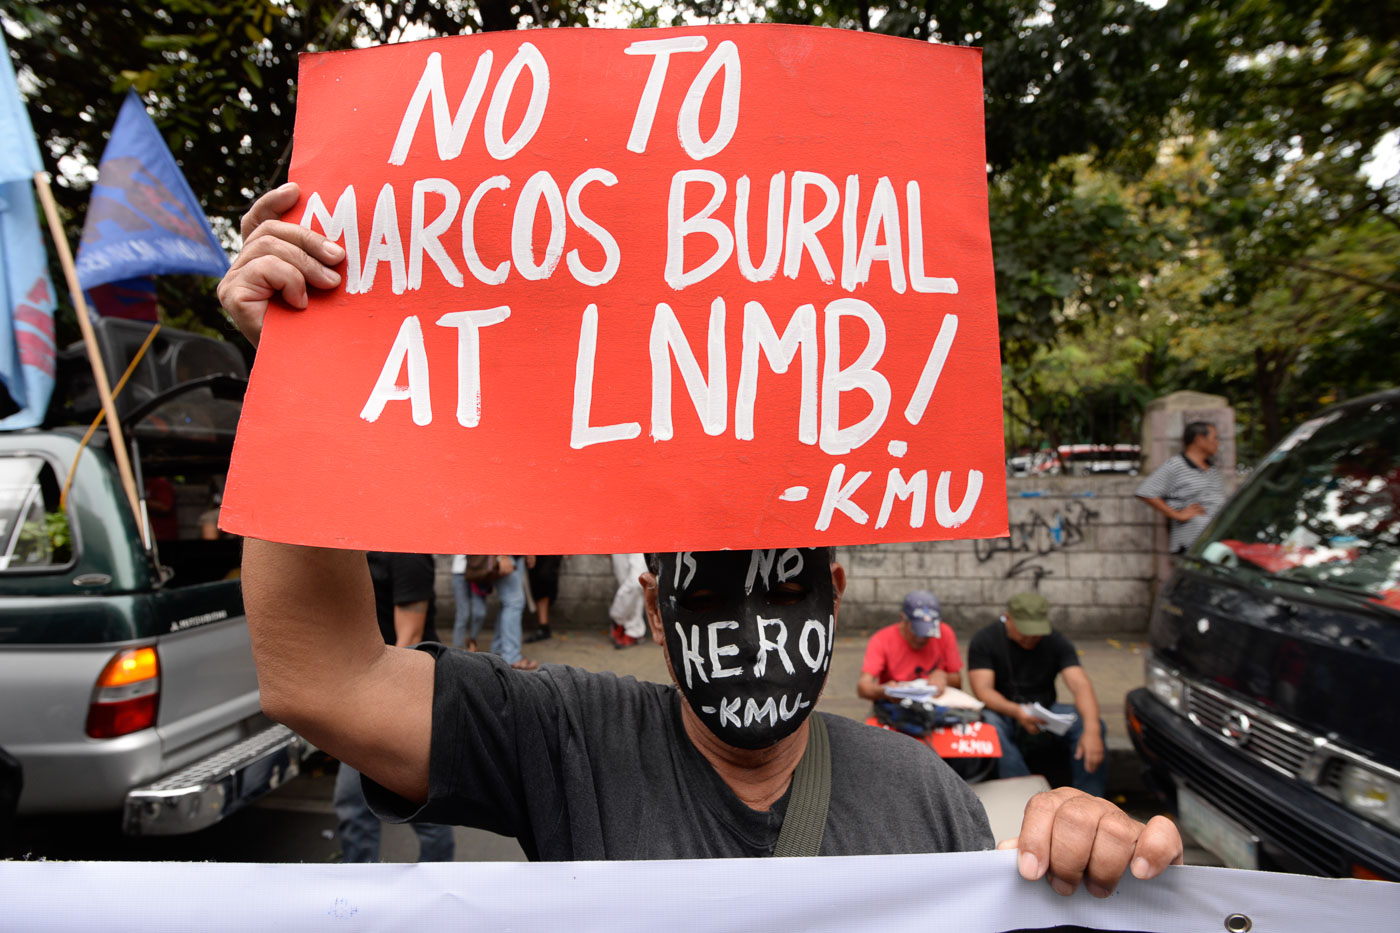 PROTESTING MARCOS BURIAL Protestors gather in front of the Philippine General Hospital in Manila to protest against the burial of dictator Ferdinand Marcos at the Libingan ng mga Bayani on November 18, 2016. Photo by LeAnne Jazul/Rappler 